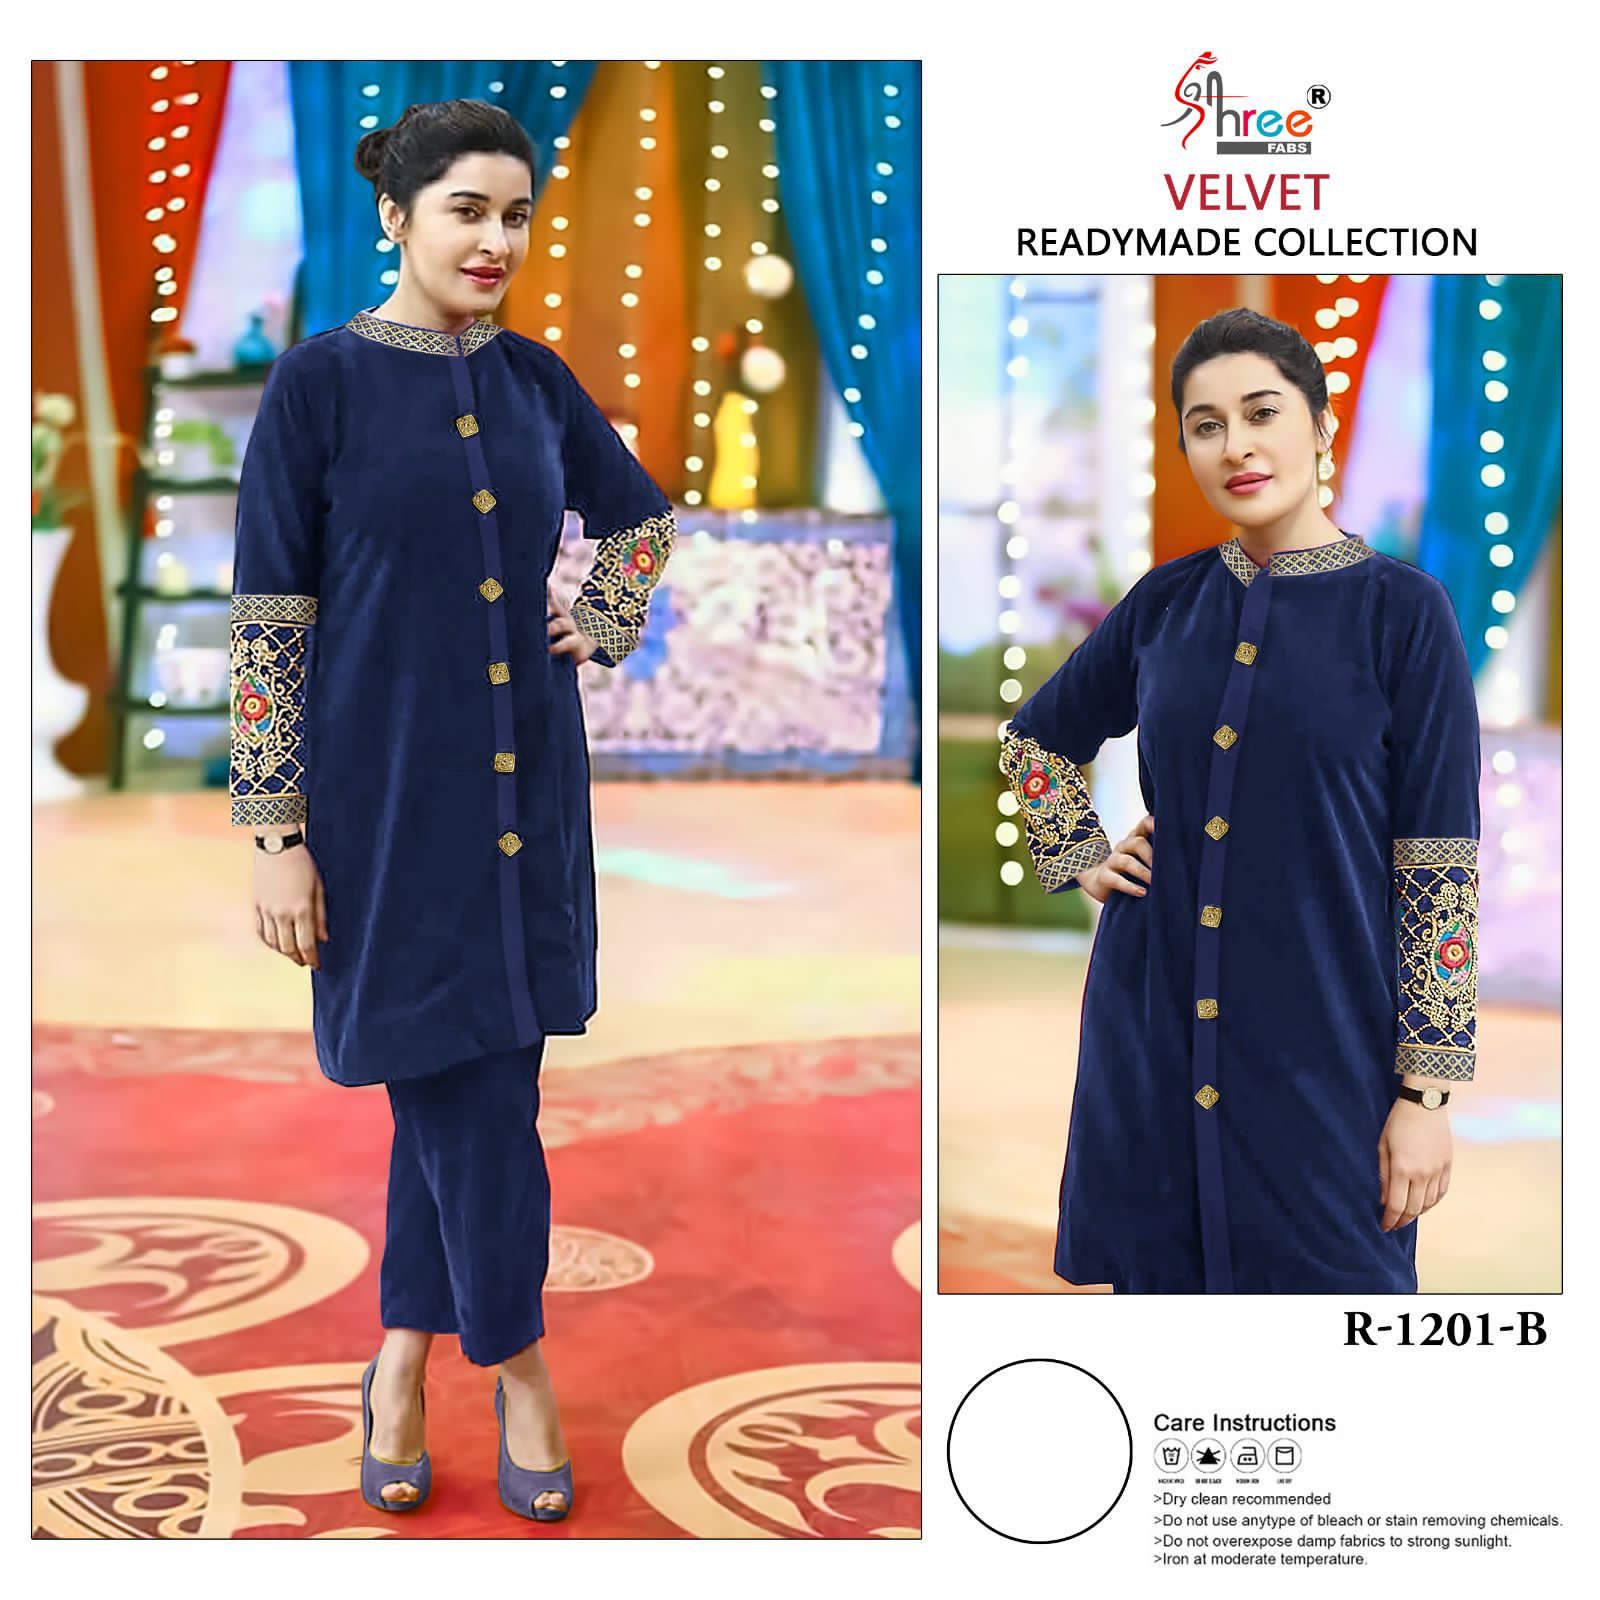 SHREE FABS R 1201 SERIES READYMADE VELVET SUITS